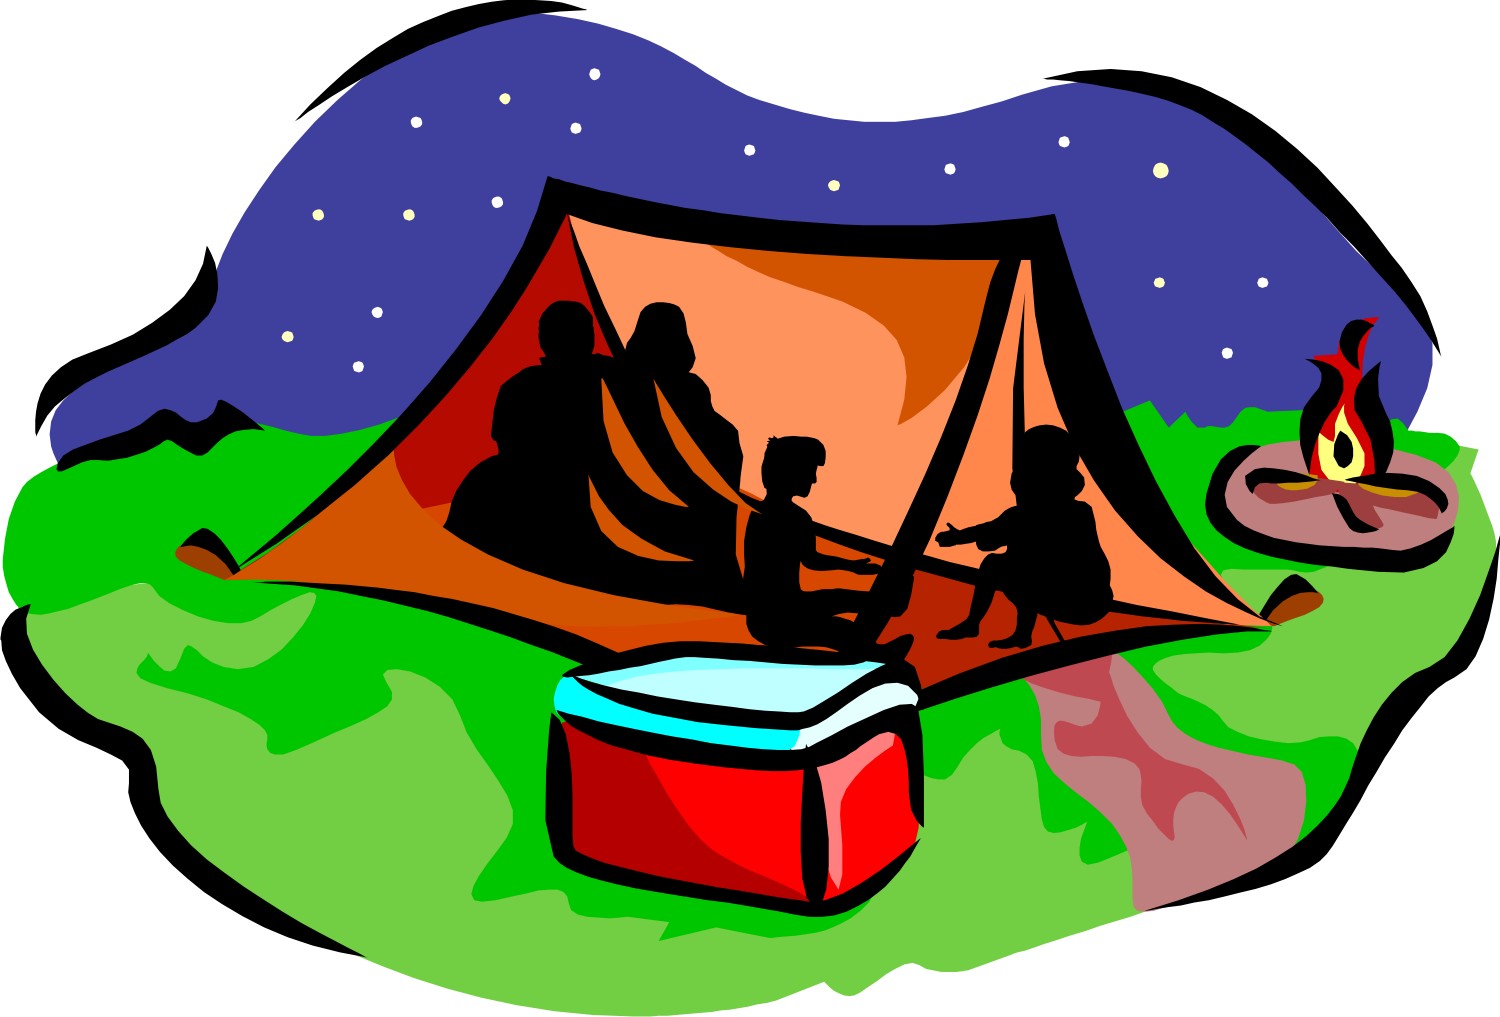 Campfire Tent Clip Art Free Cliparts That You Can Download To You